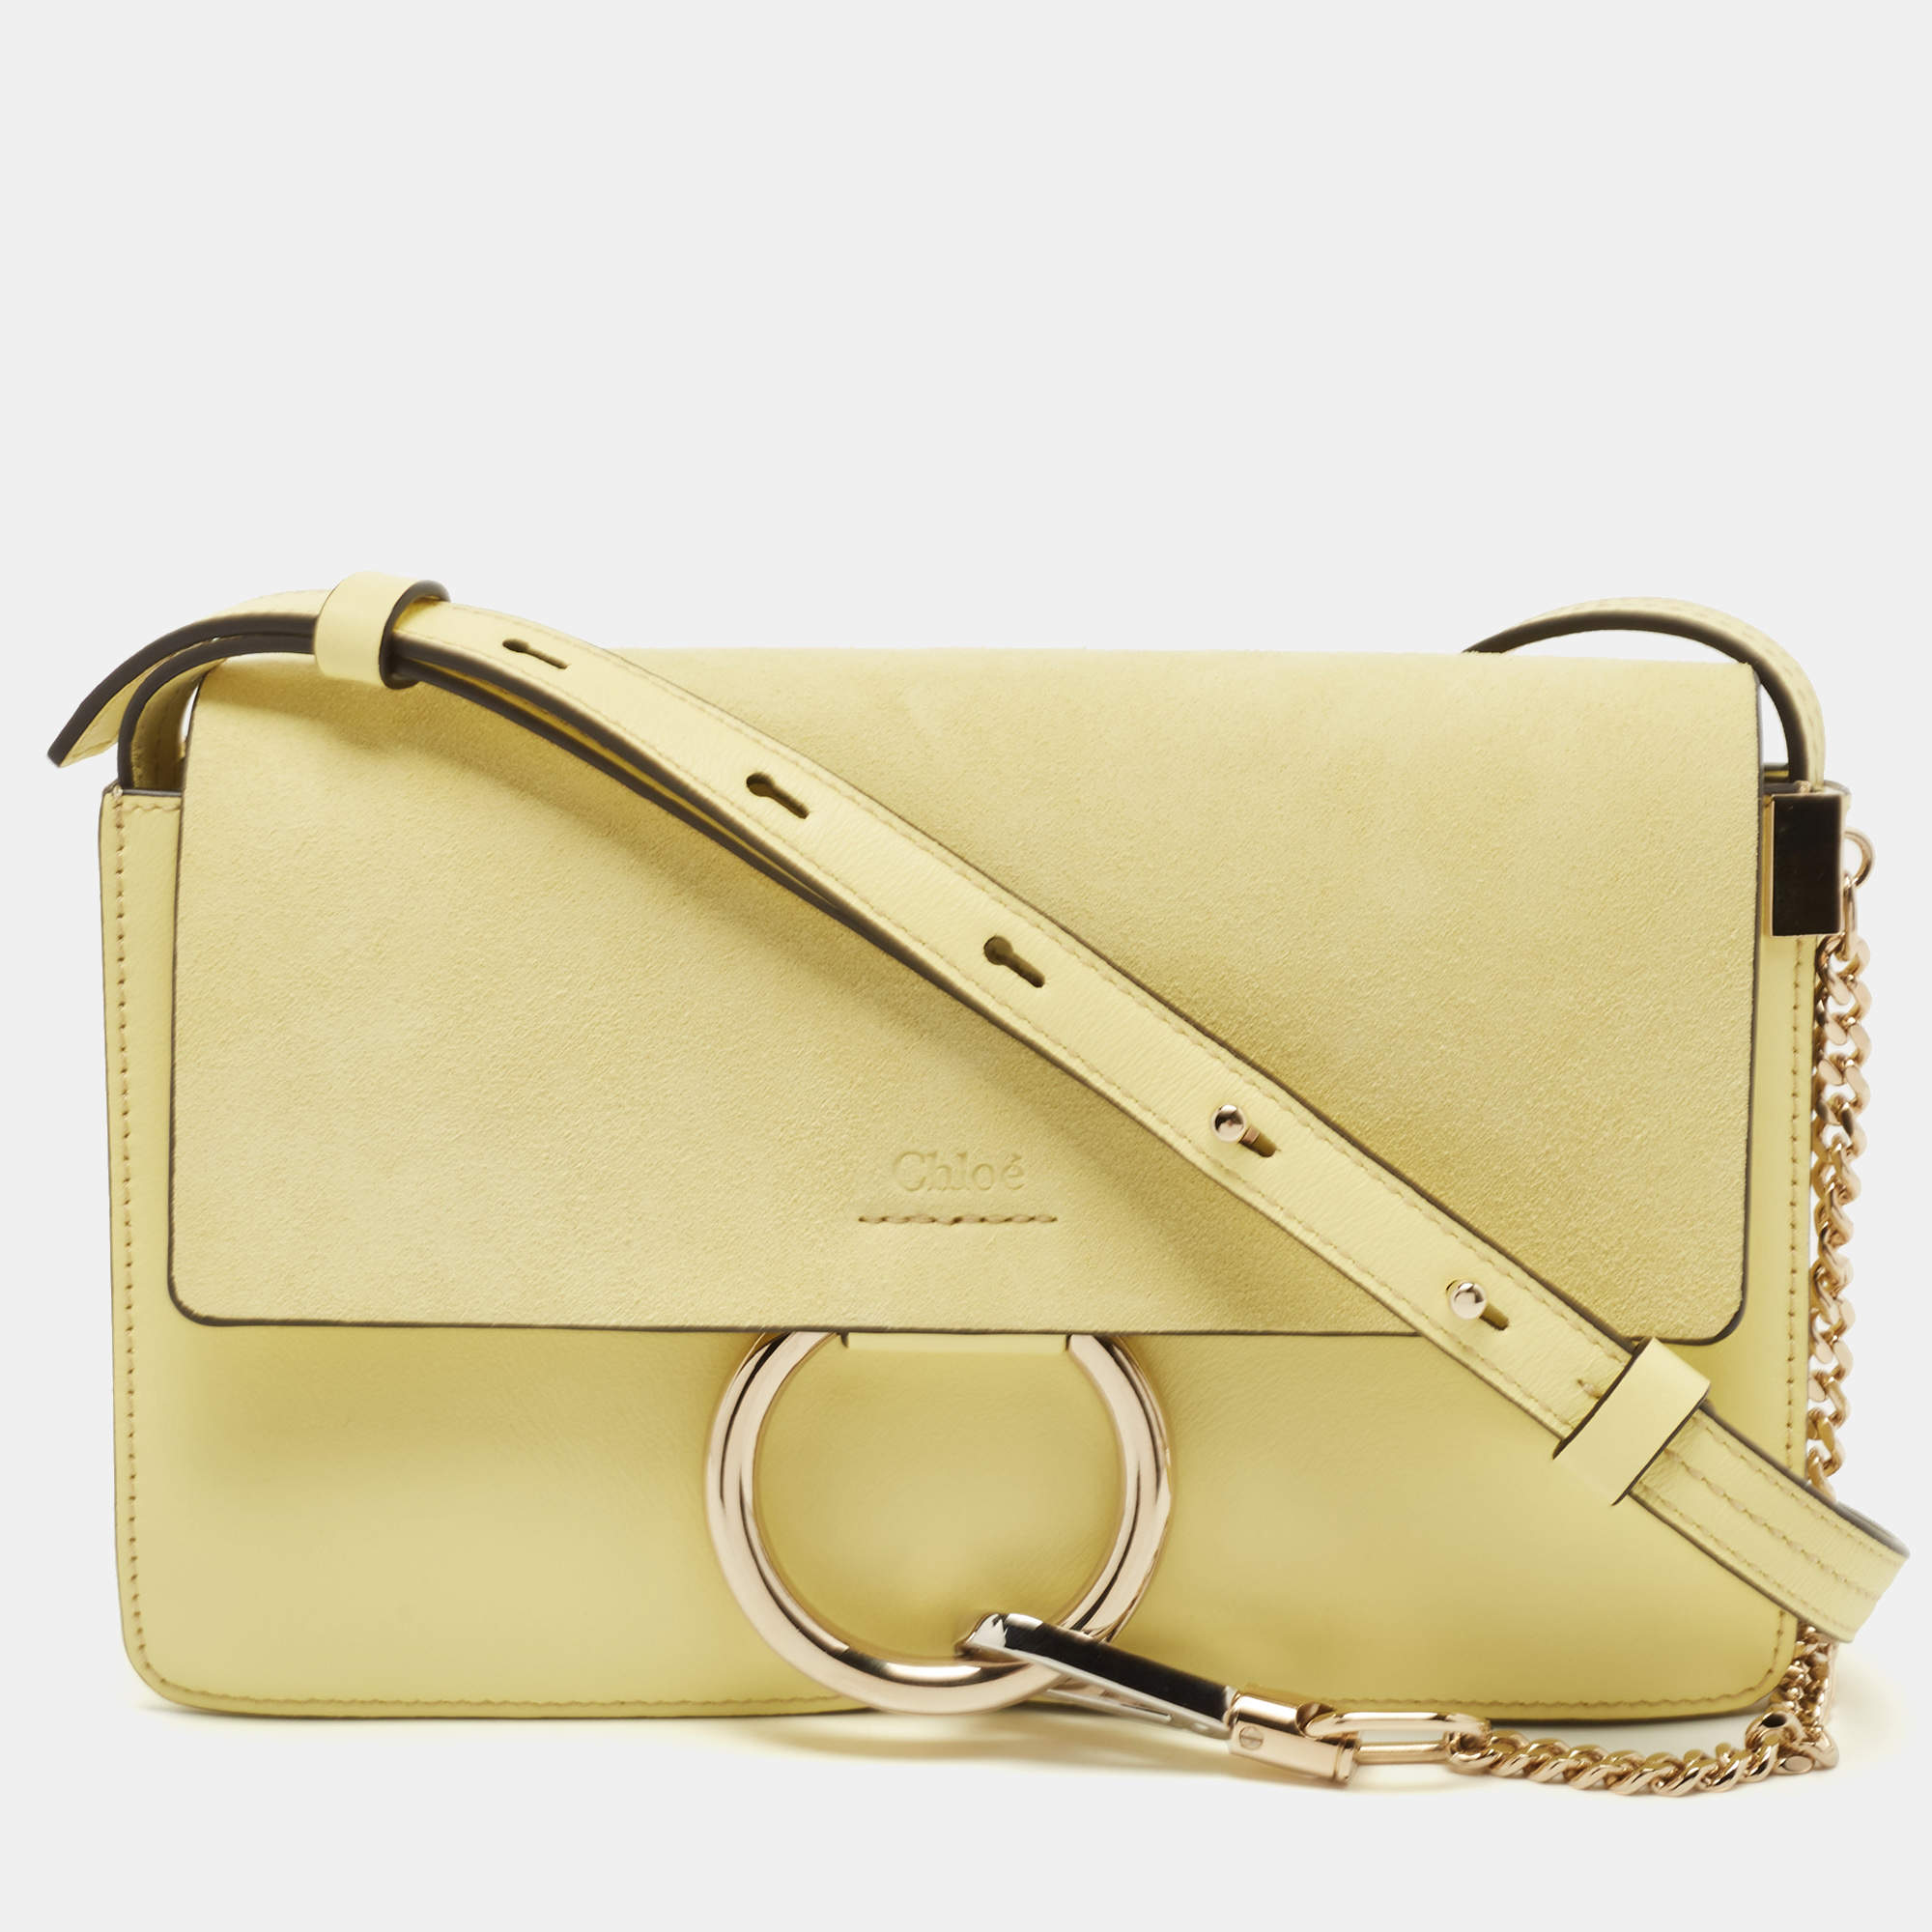 Chloe Faye Small Suede/Leather Shoulder Bag